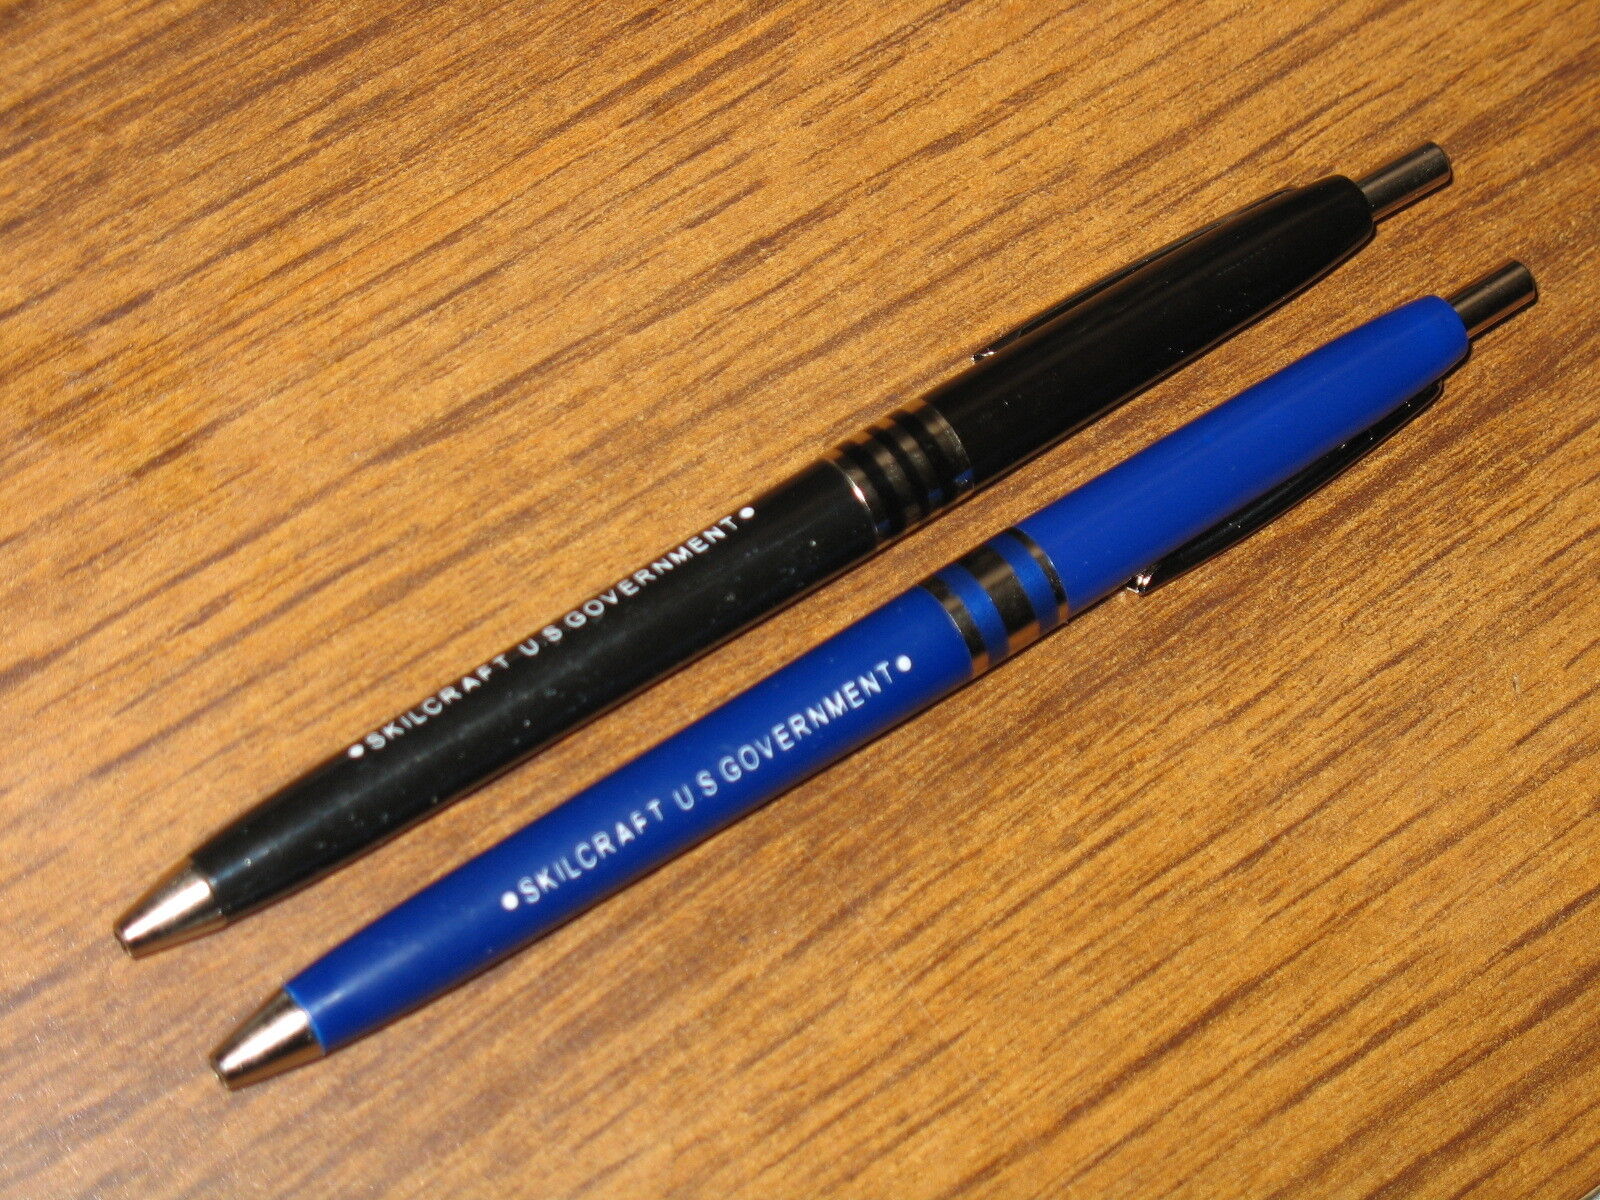 NEW (2) Skilcraft US Government (1) Black (1) Blue Ballpoint Ball-Point PENS